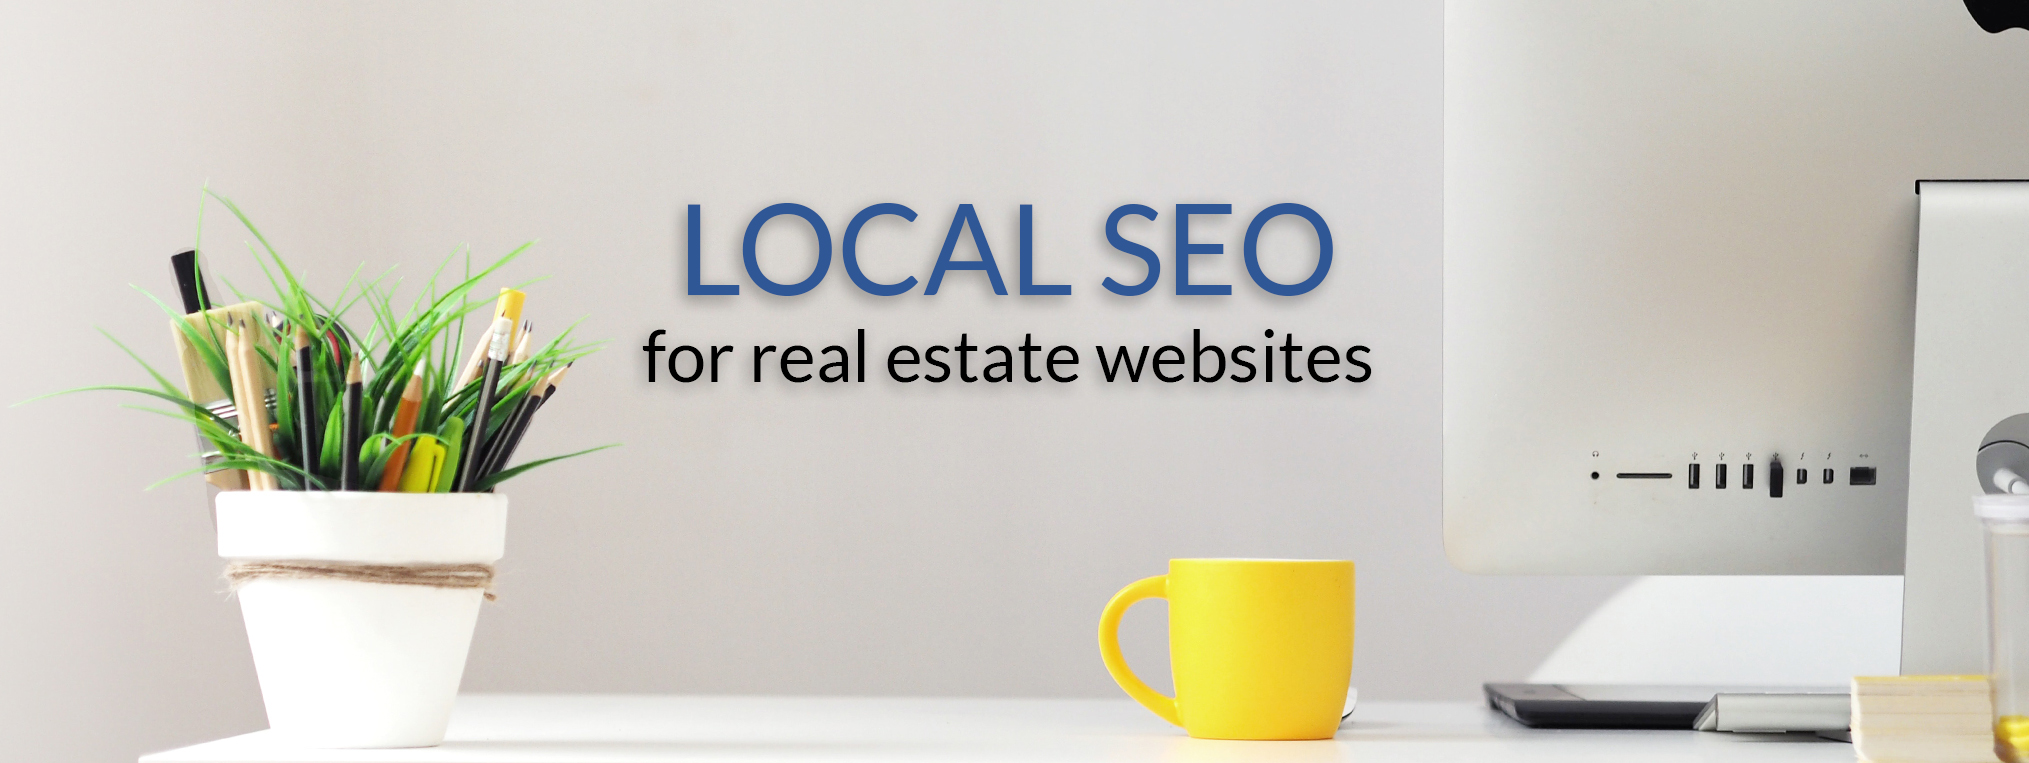 SEO for Real Estate Lawyers - Law Firm SEO Experts